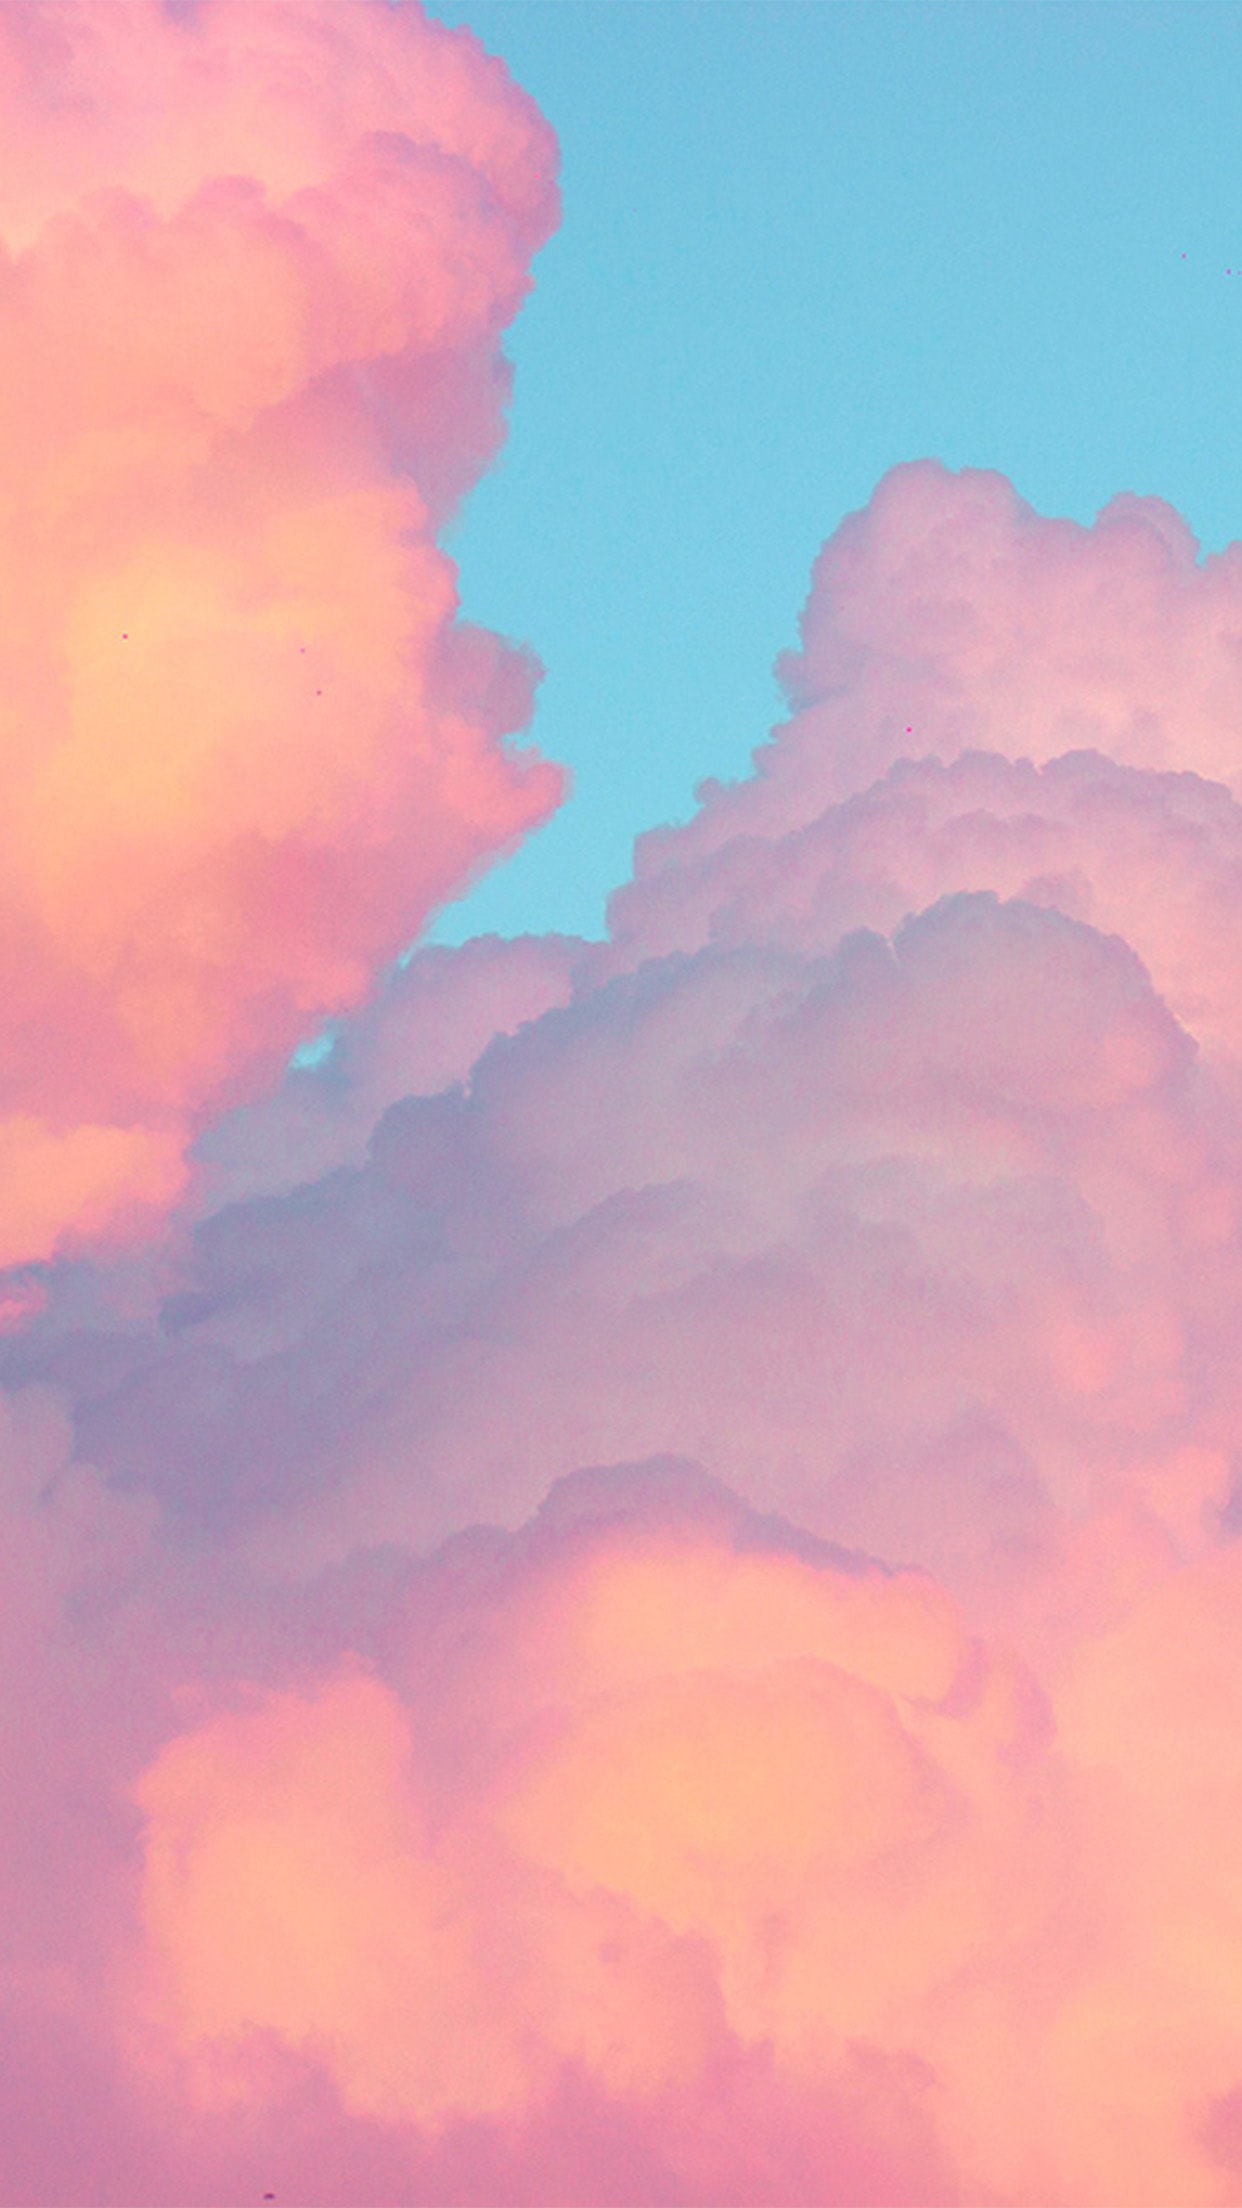 Pink Cloud Background Kolpaper Awesome Free Hd Wallpapers Warm picture sky photography clouds sunlight hd wallpaper. pink cloud background kolpaper